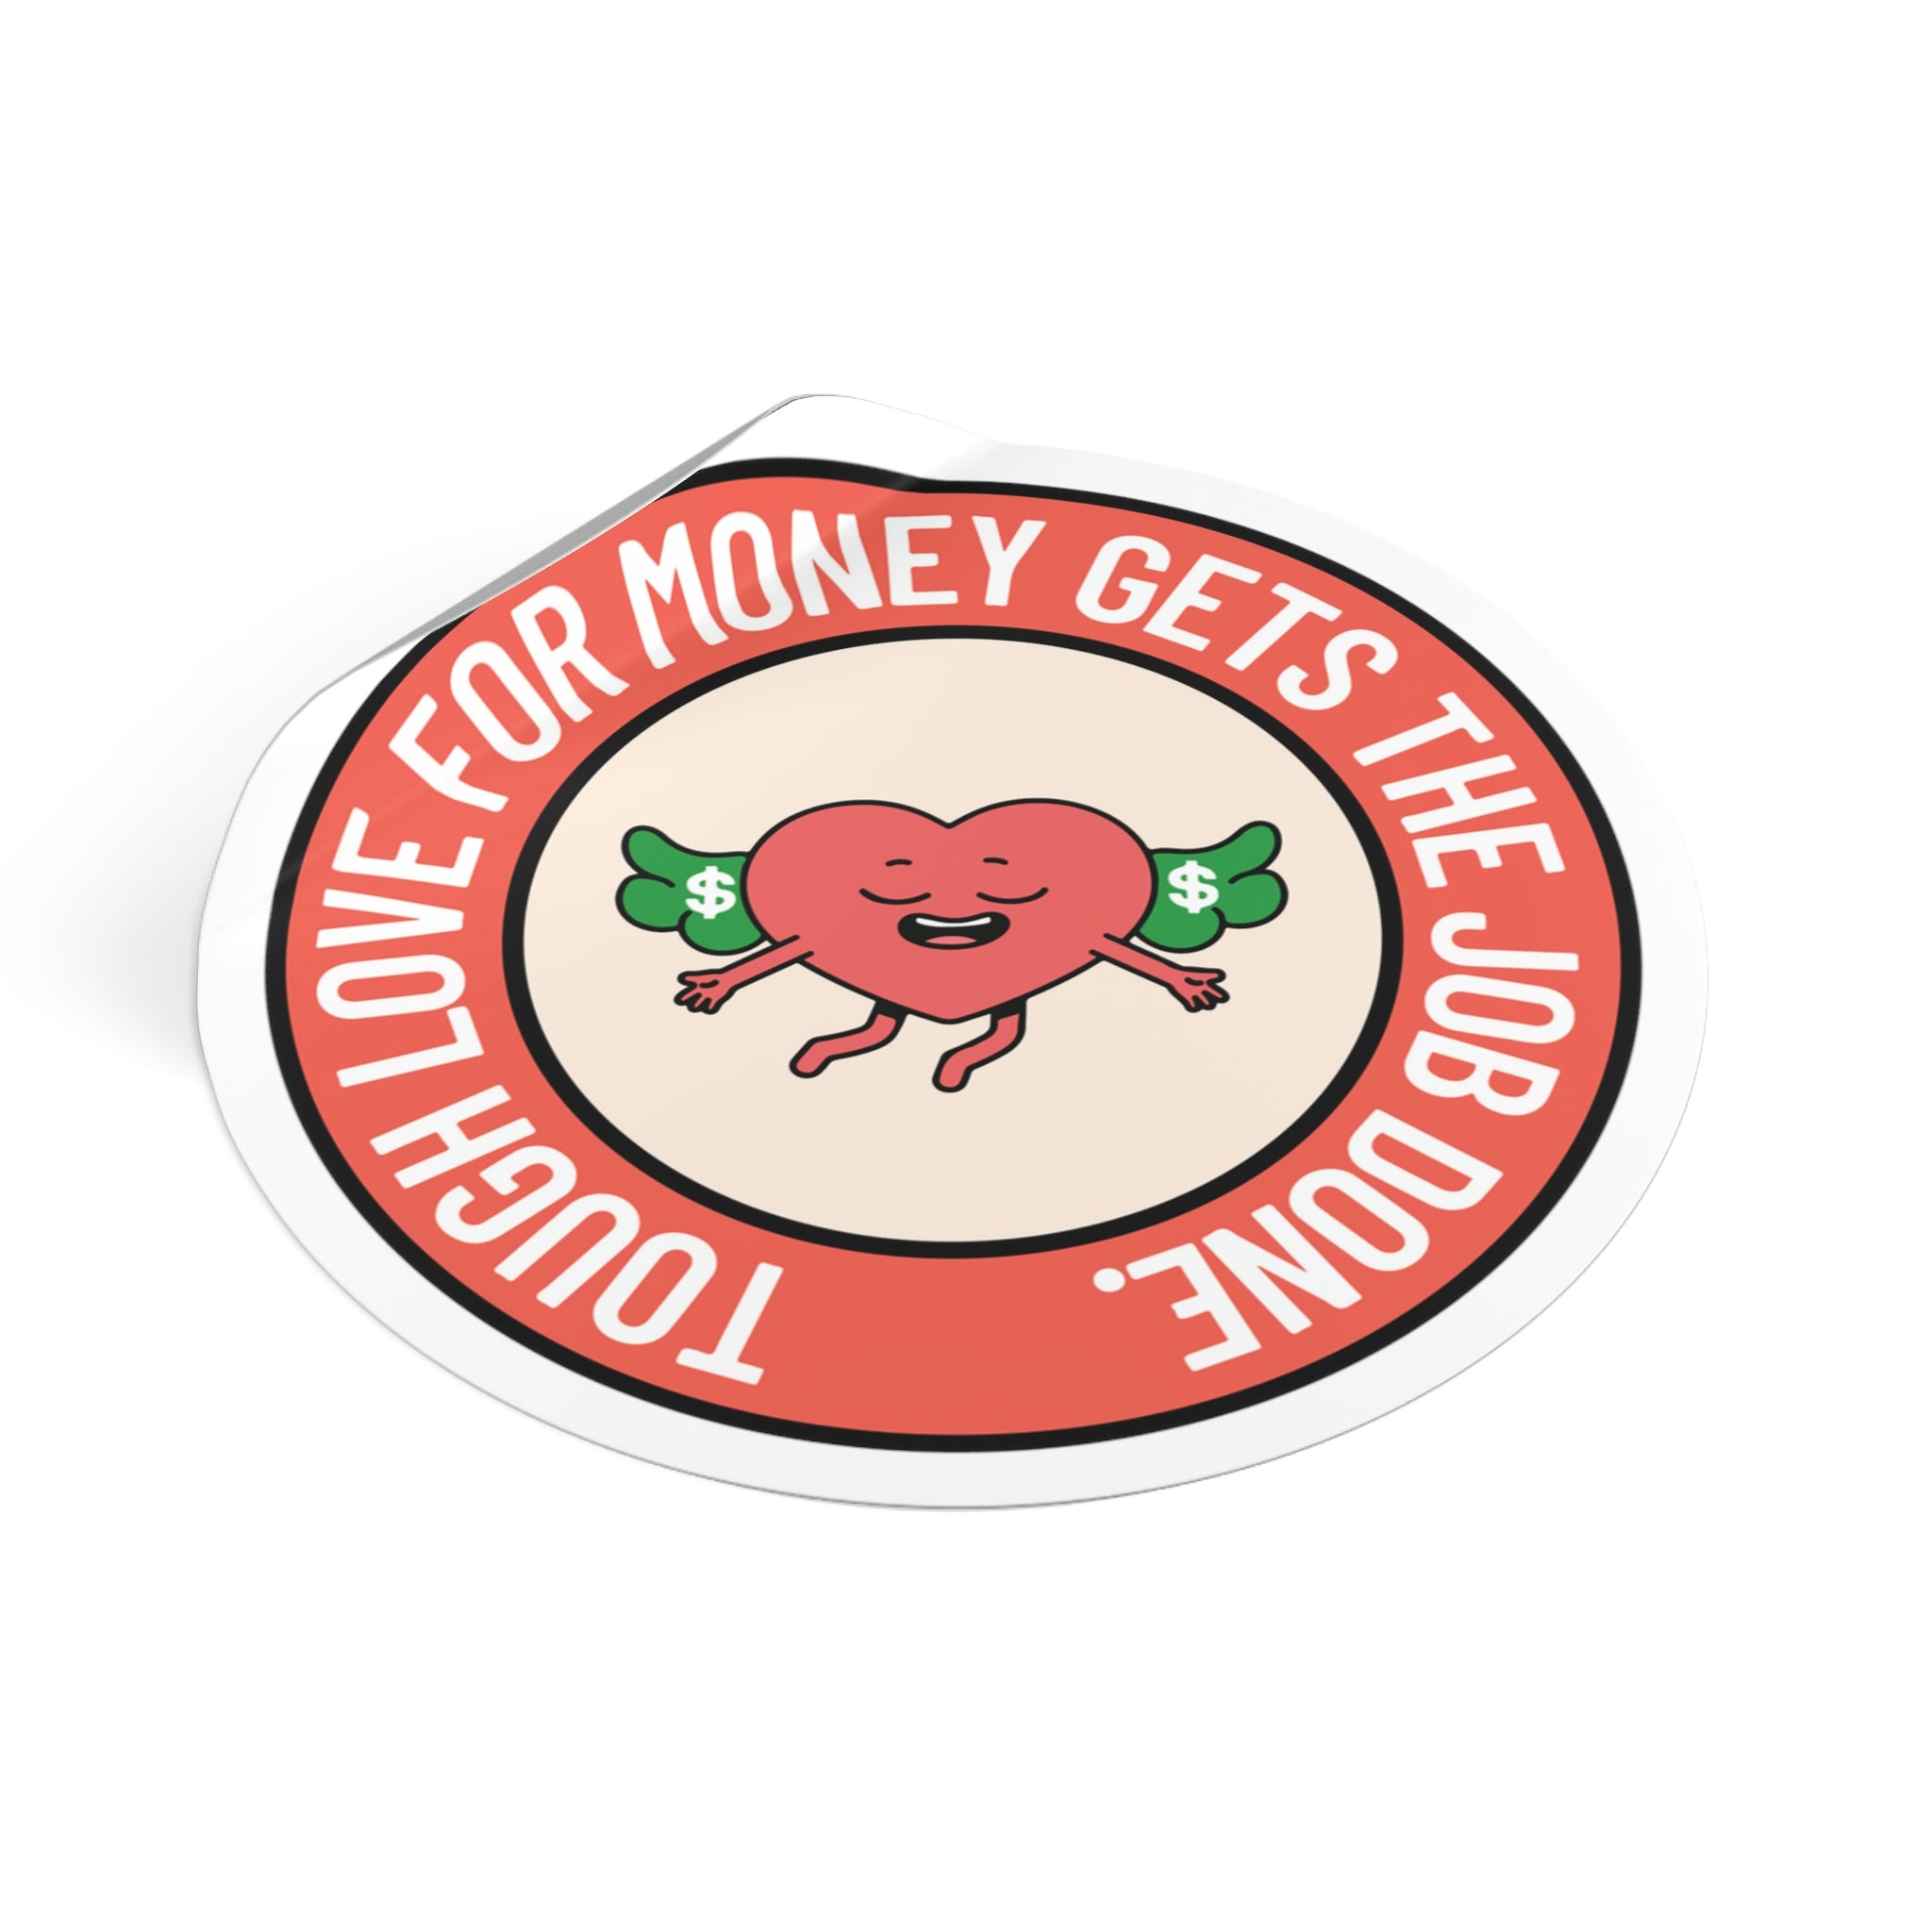 Tough love for money gets the job done sticker | Saving money sayings #size_3x3-inches